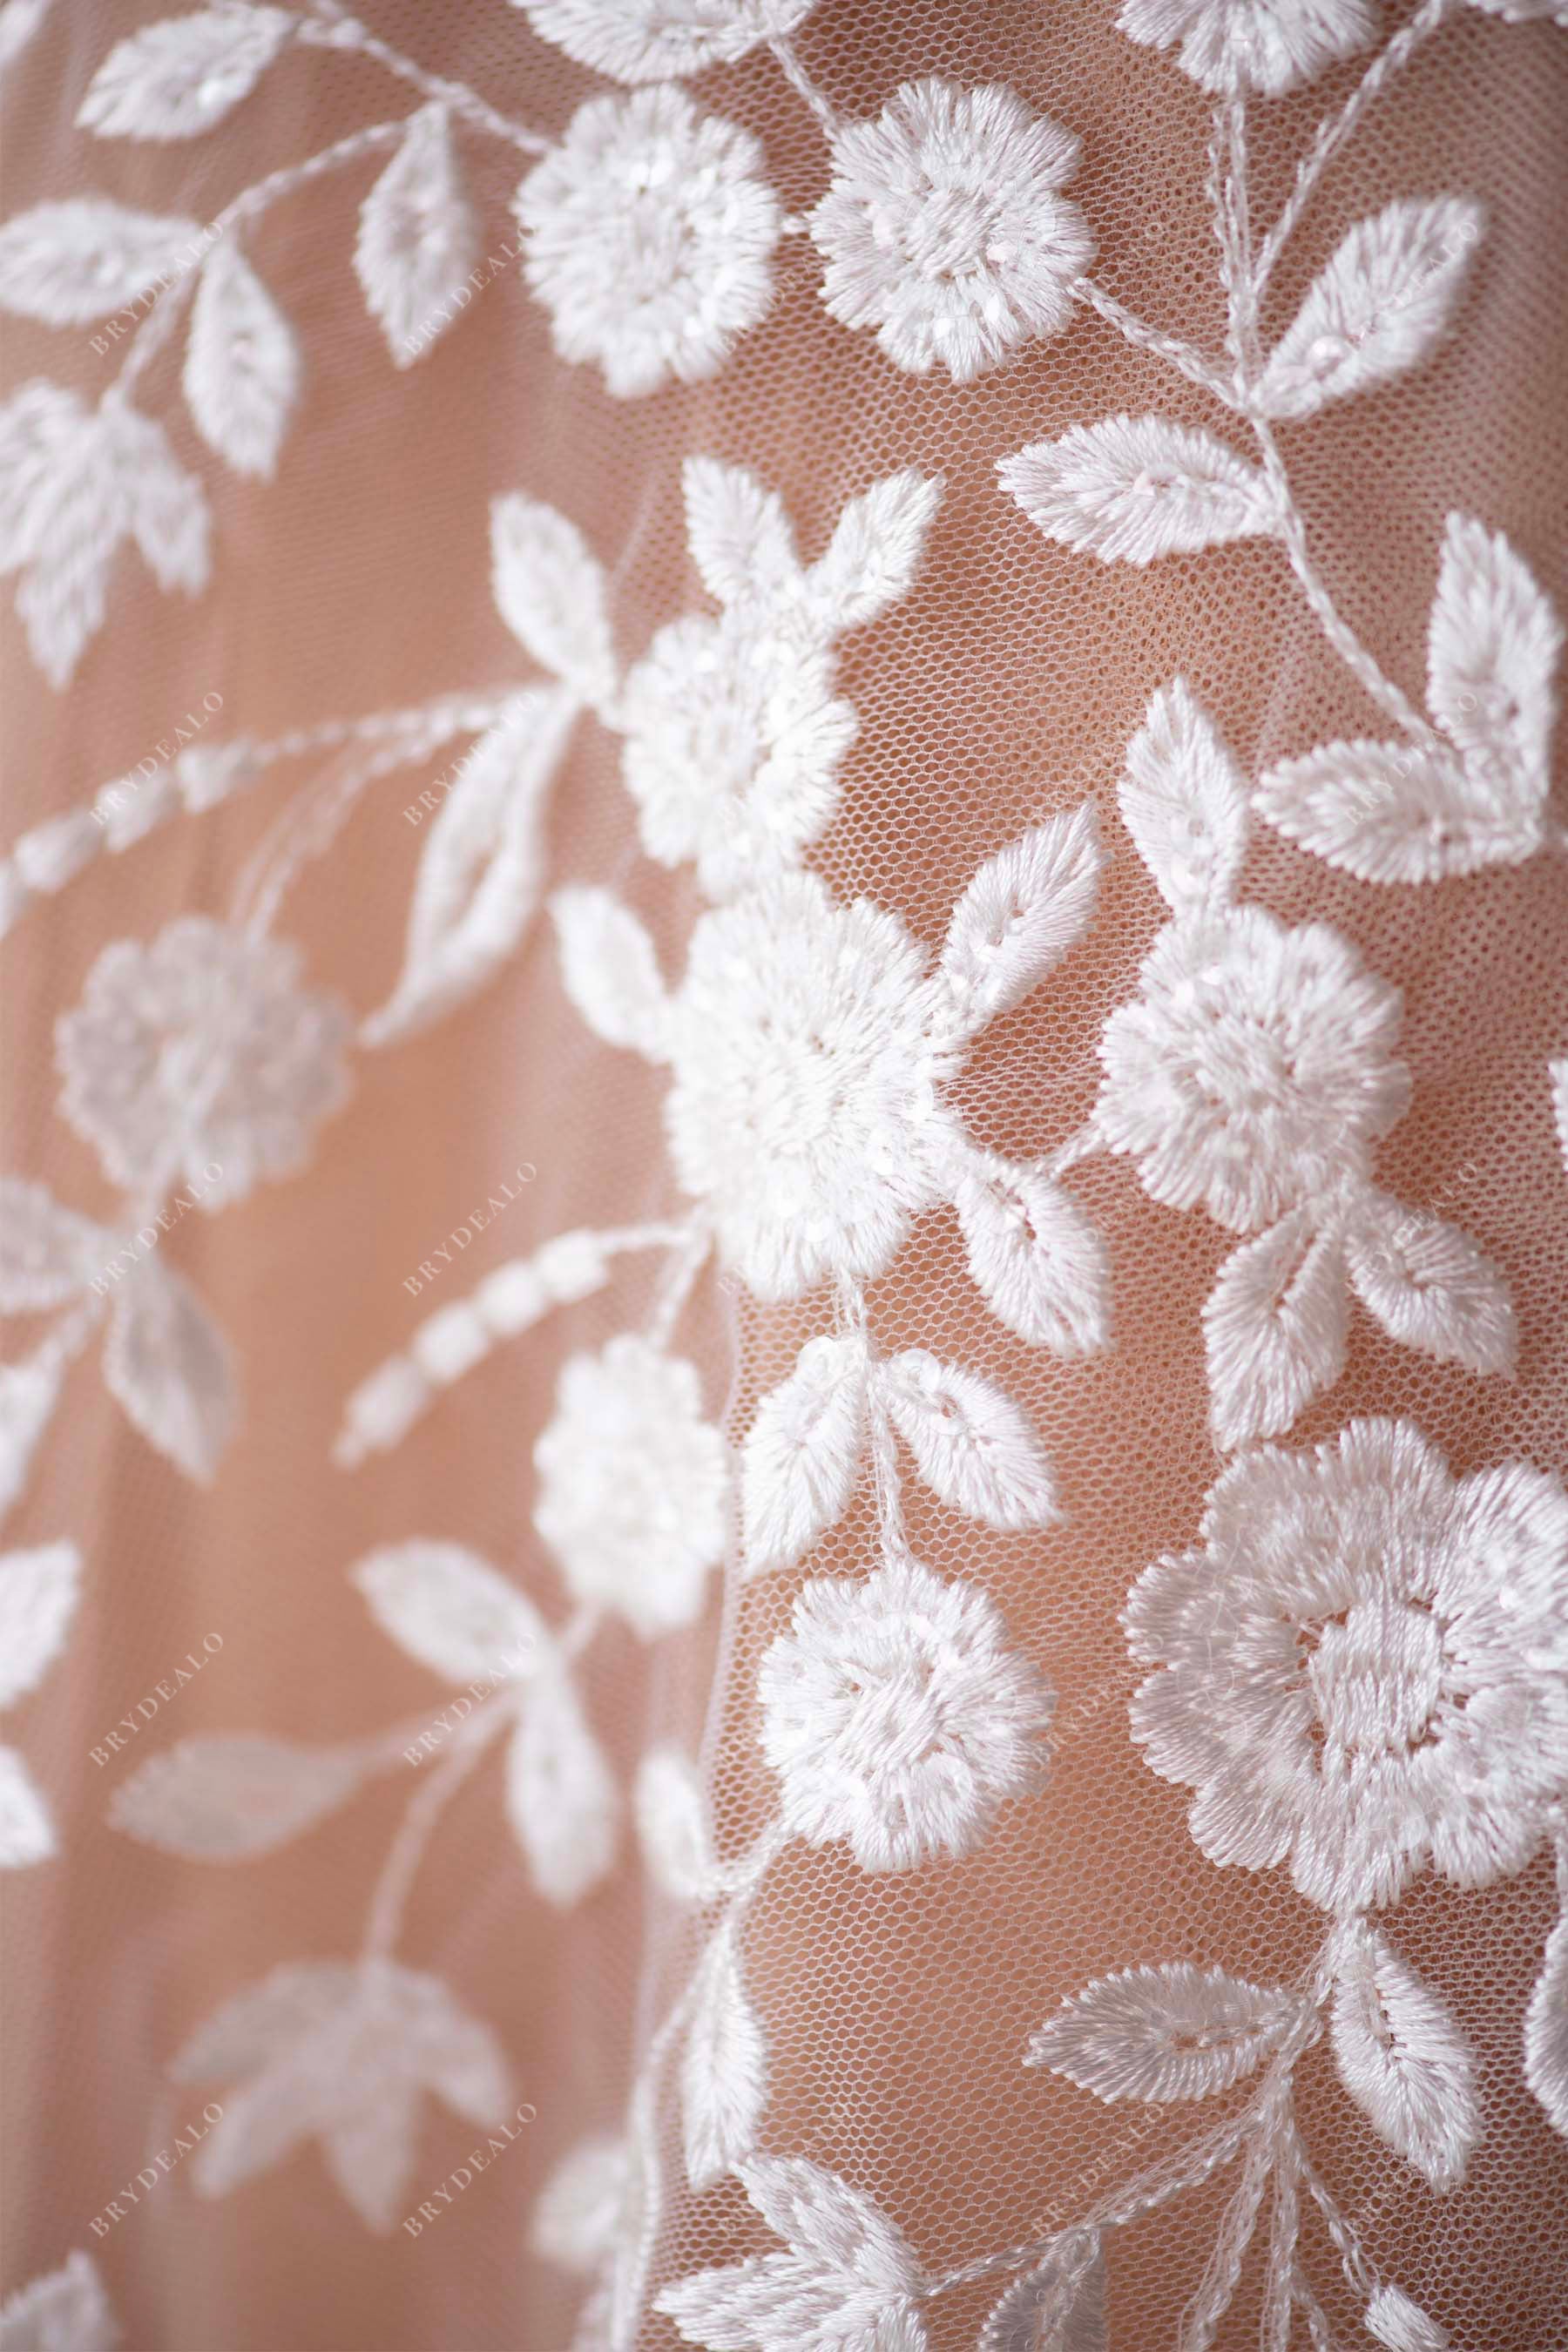 embroidery flower lace fabric